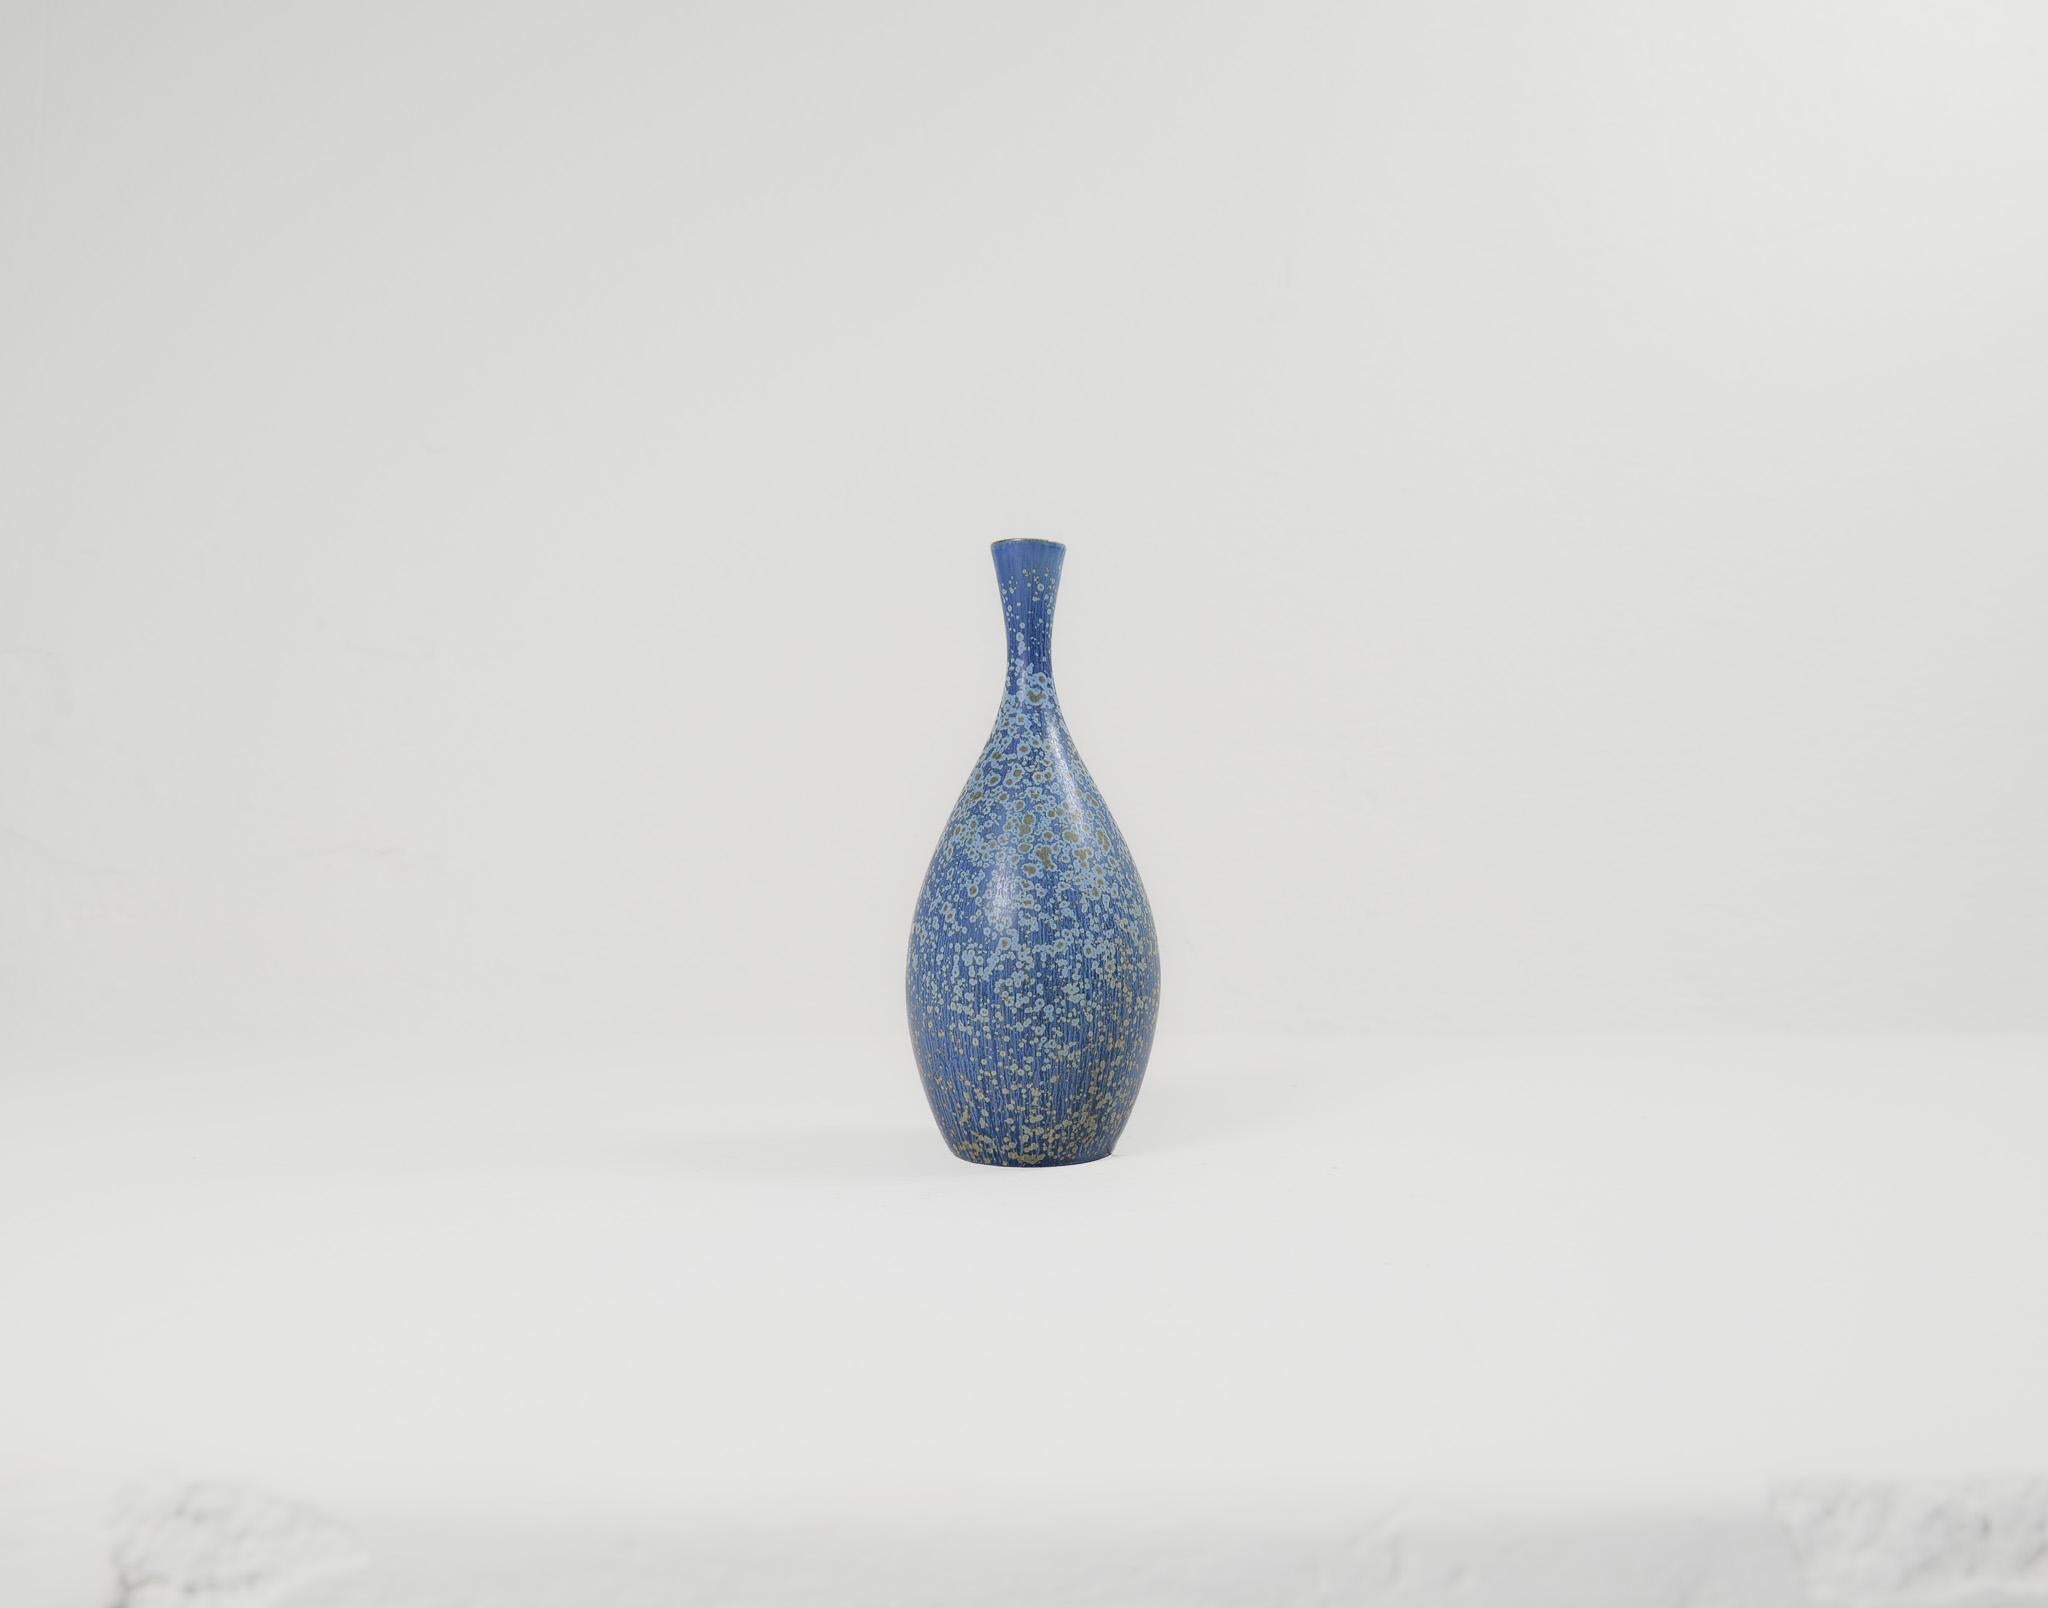 This stunning piece of ceramic was produced at Rörstrand and maker/designer Carl Harry Stålhane. Made in Sweden in the 1950s. Exceptional beautiful blue glazed vases with nice lines. Its rounded bottom with blue glaze and light blue green dots, the